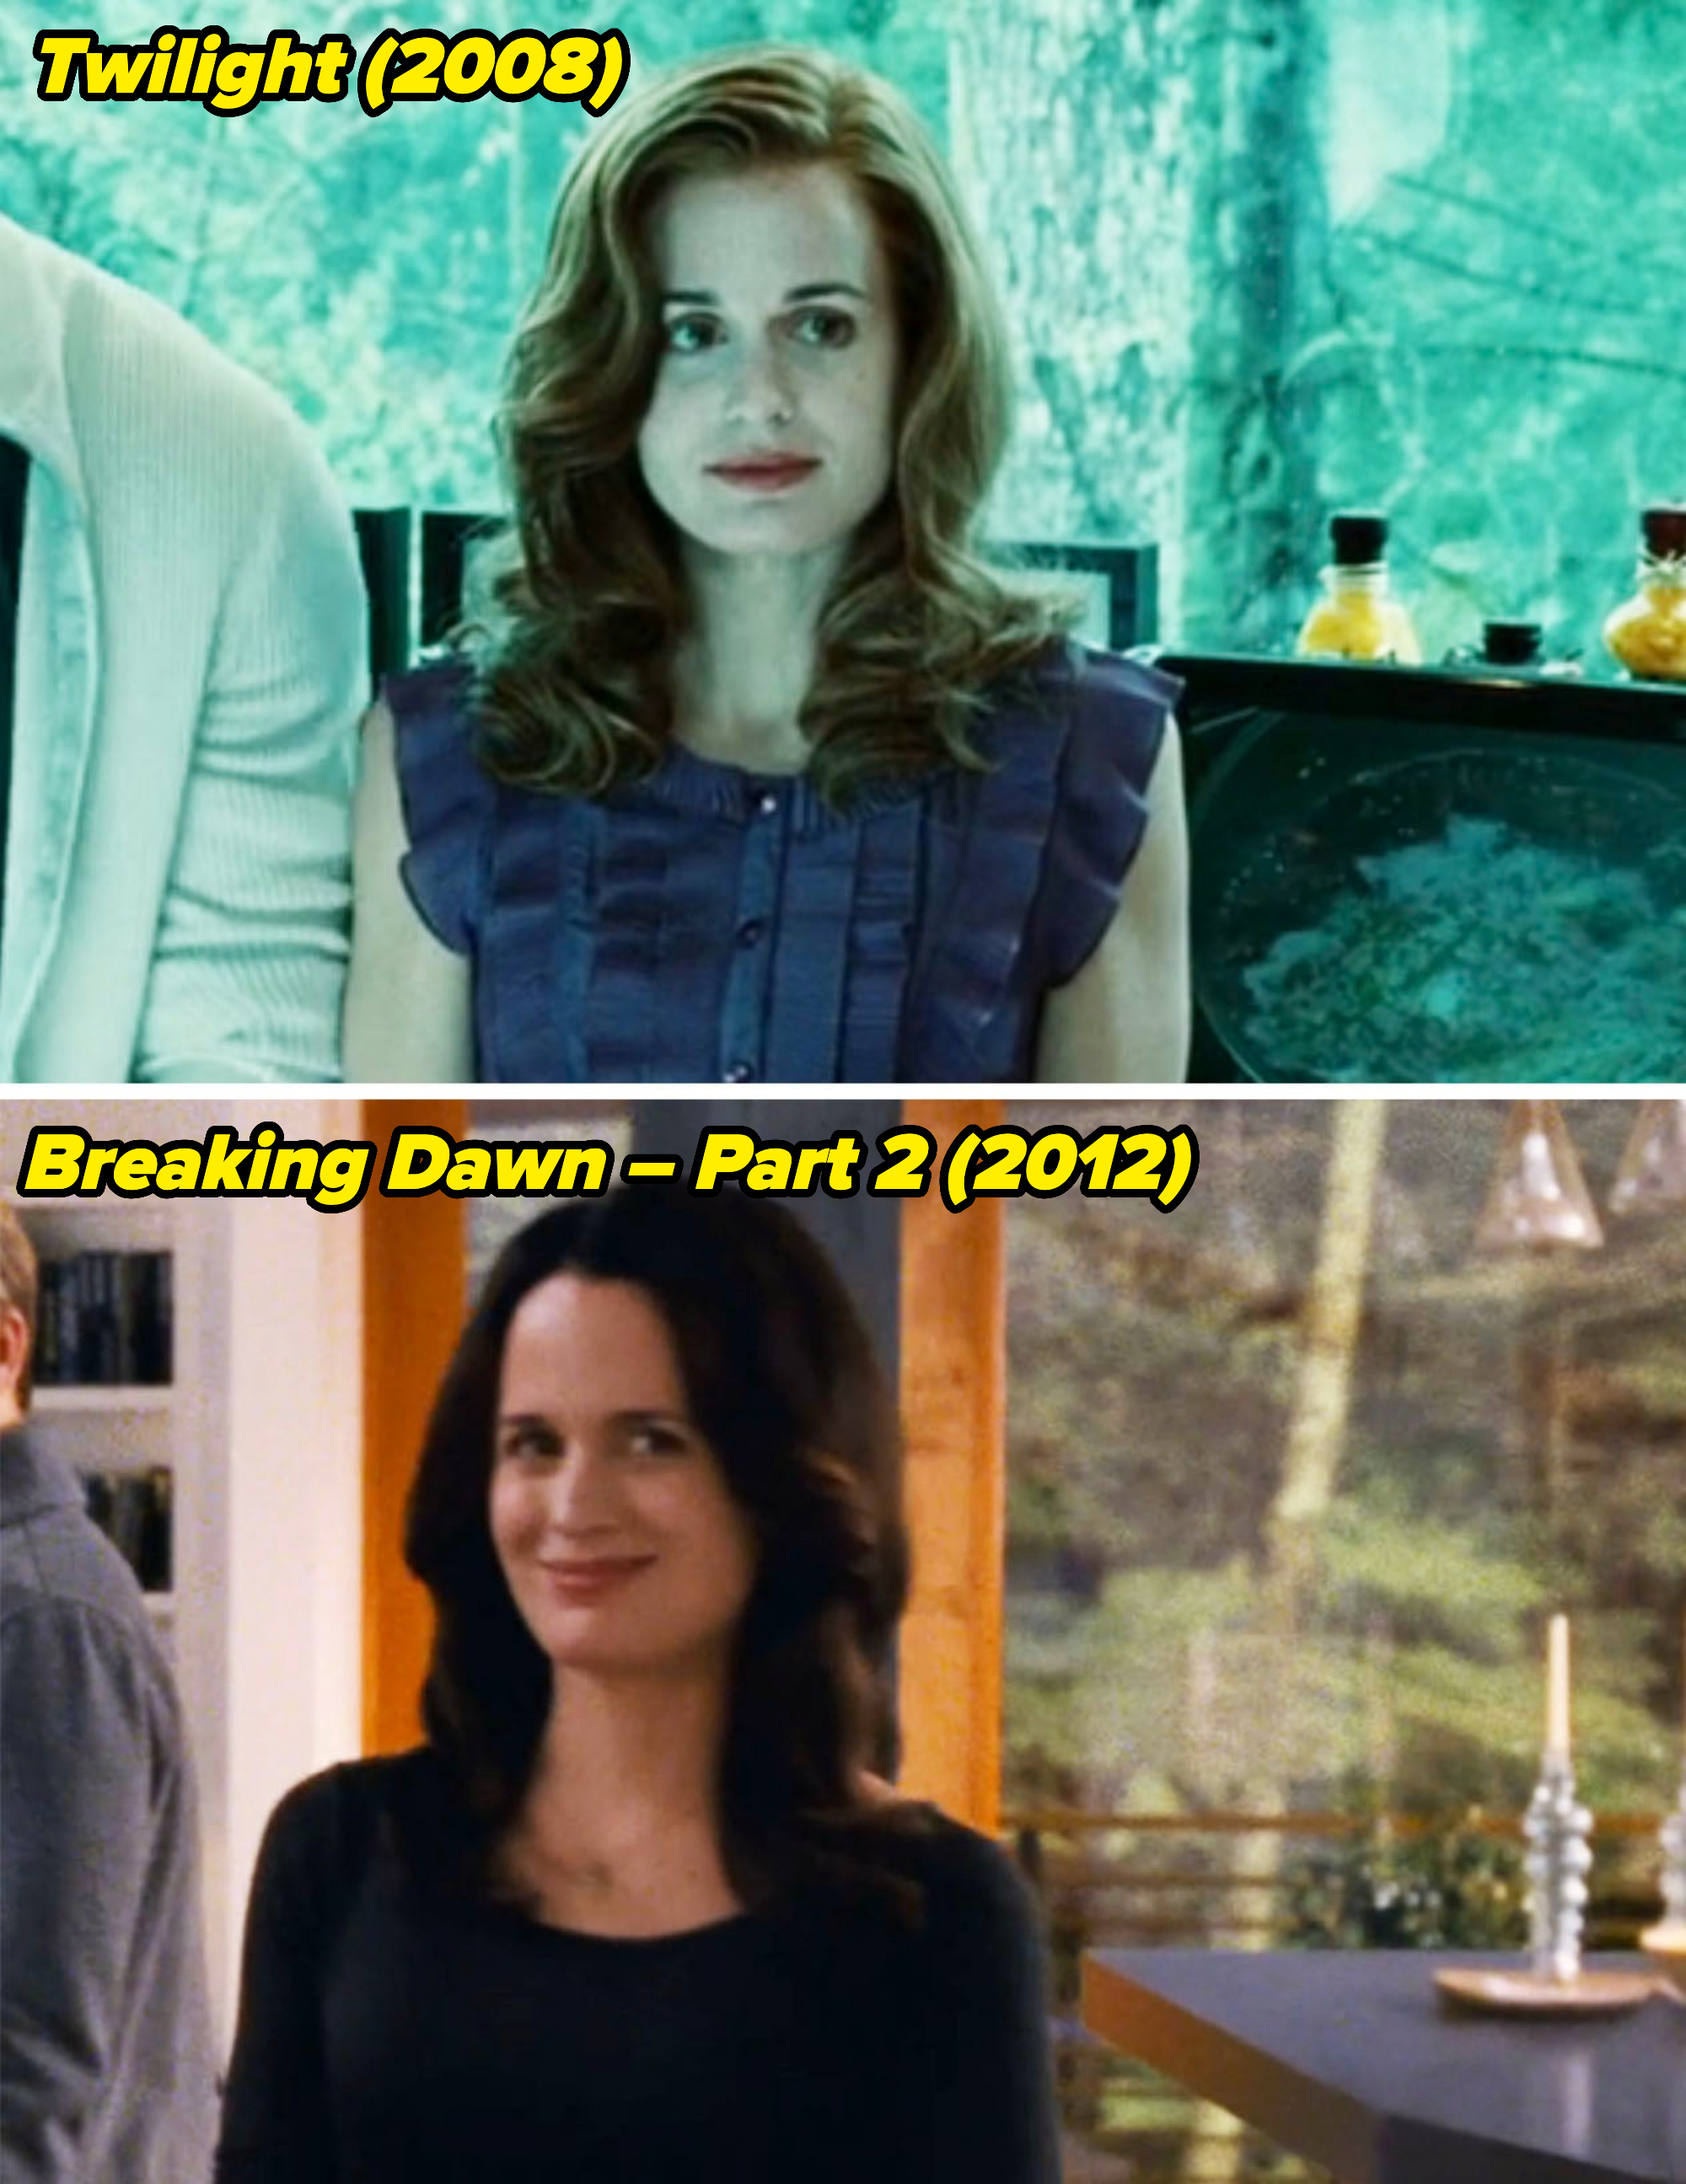 closeup of her in the kitchen in the first and last films